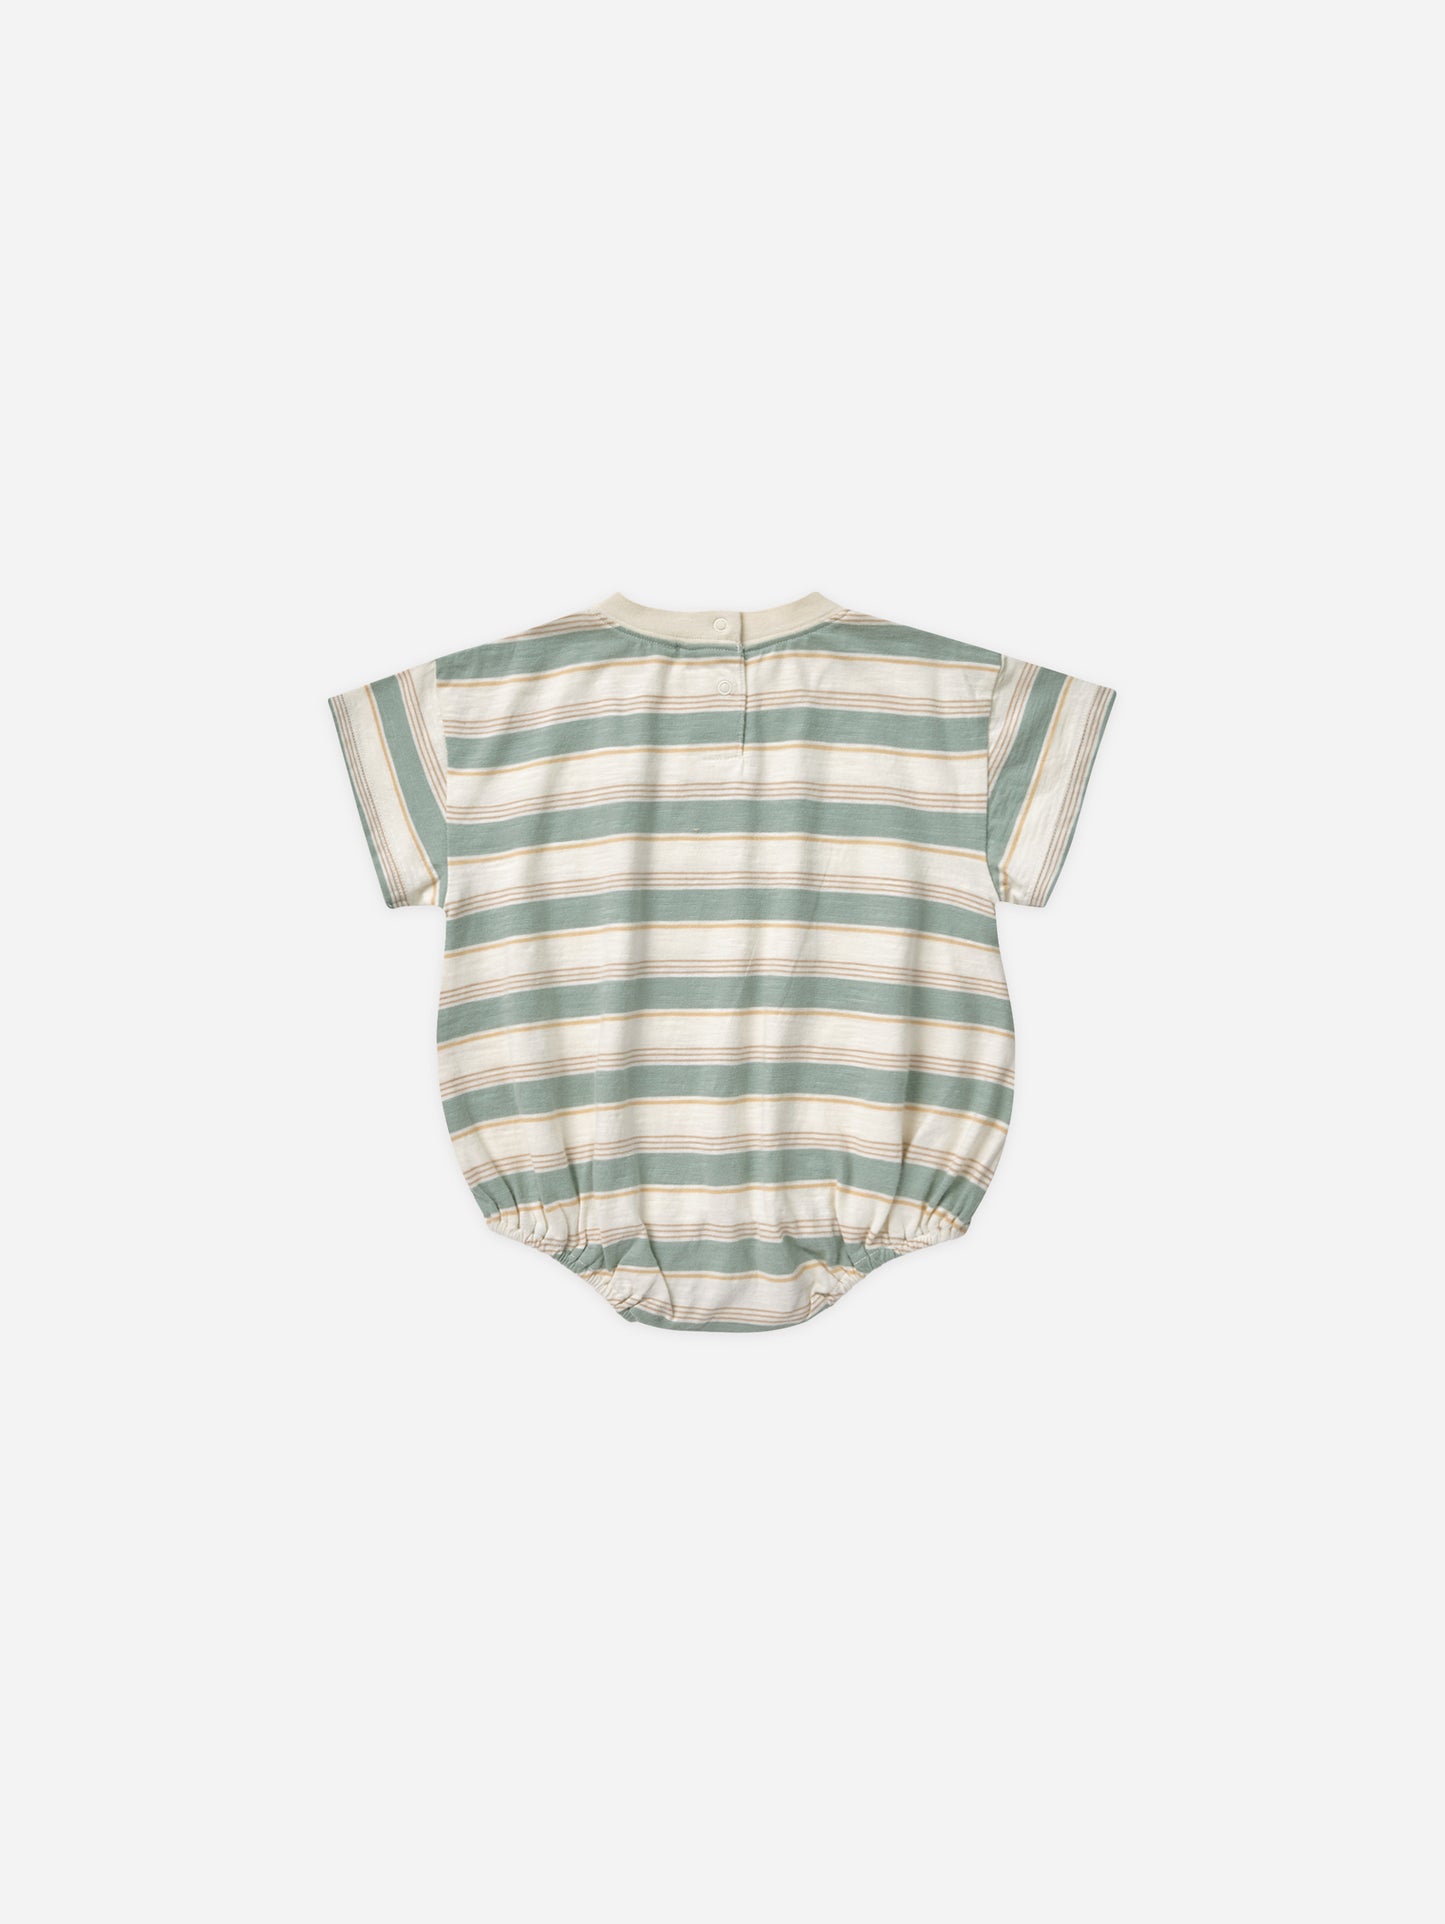 Relaxed Bubble Romper || Aqua Stripe - Rylee + Cru | Kids Clothes | Trendy Baby Clothes | Modern Infant Outfits |